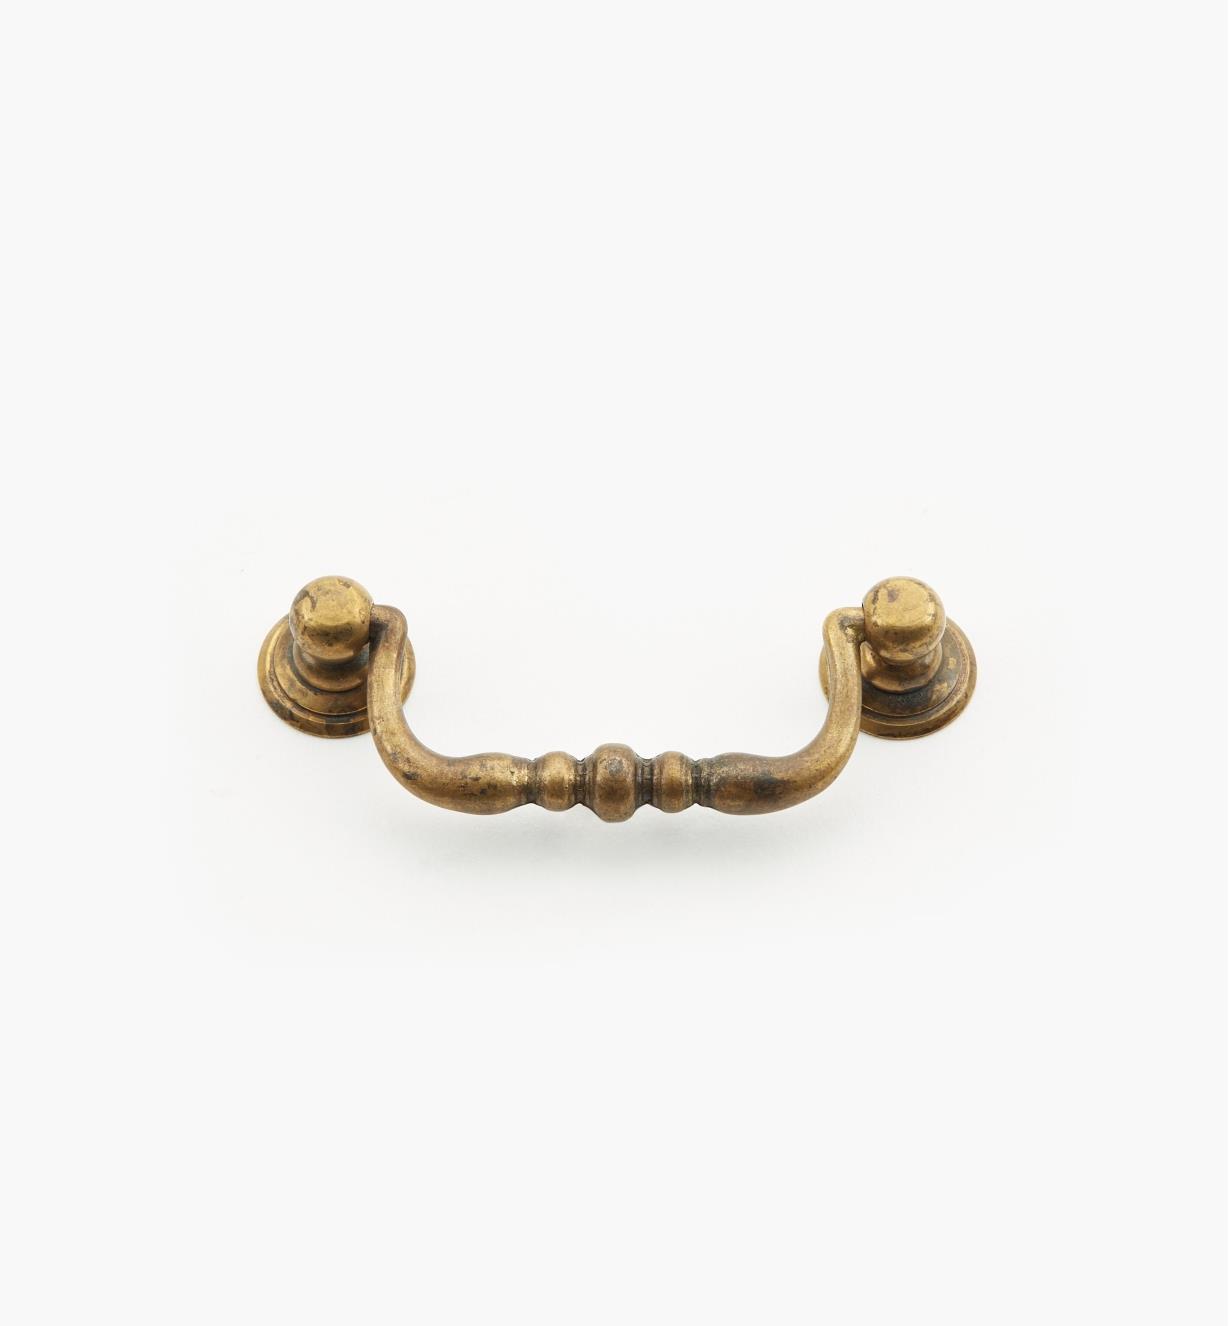 01A3961 - 64mm Old Brass Triple Bead Stop Handle